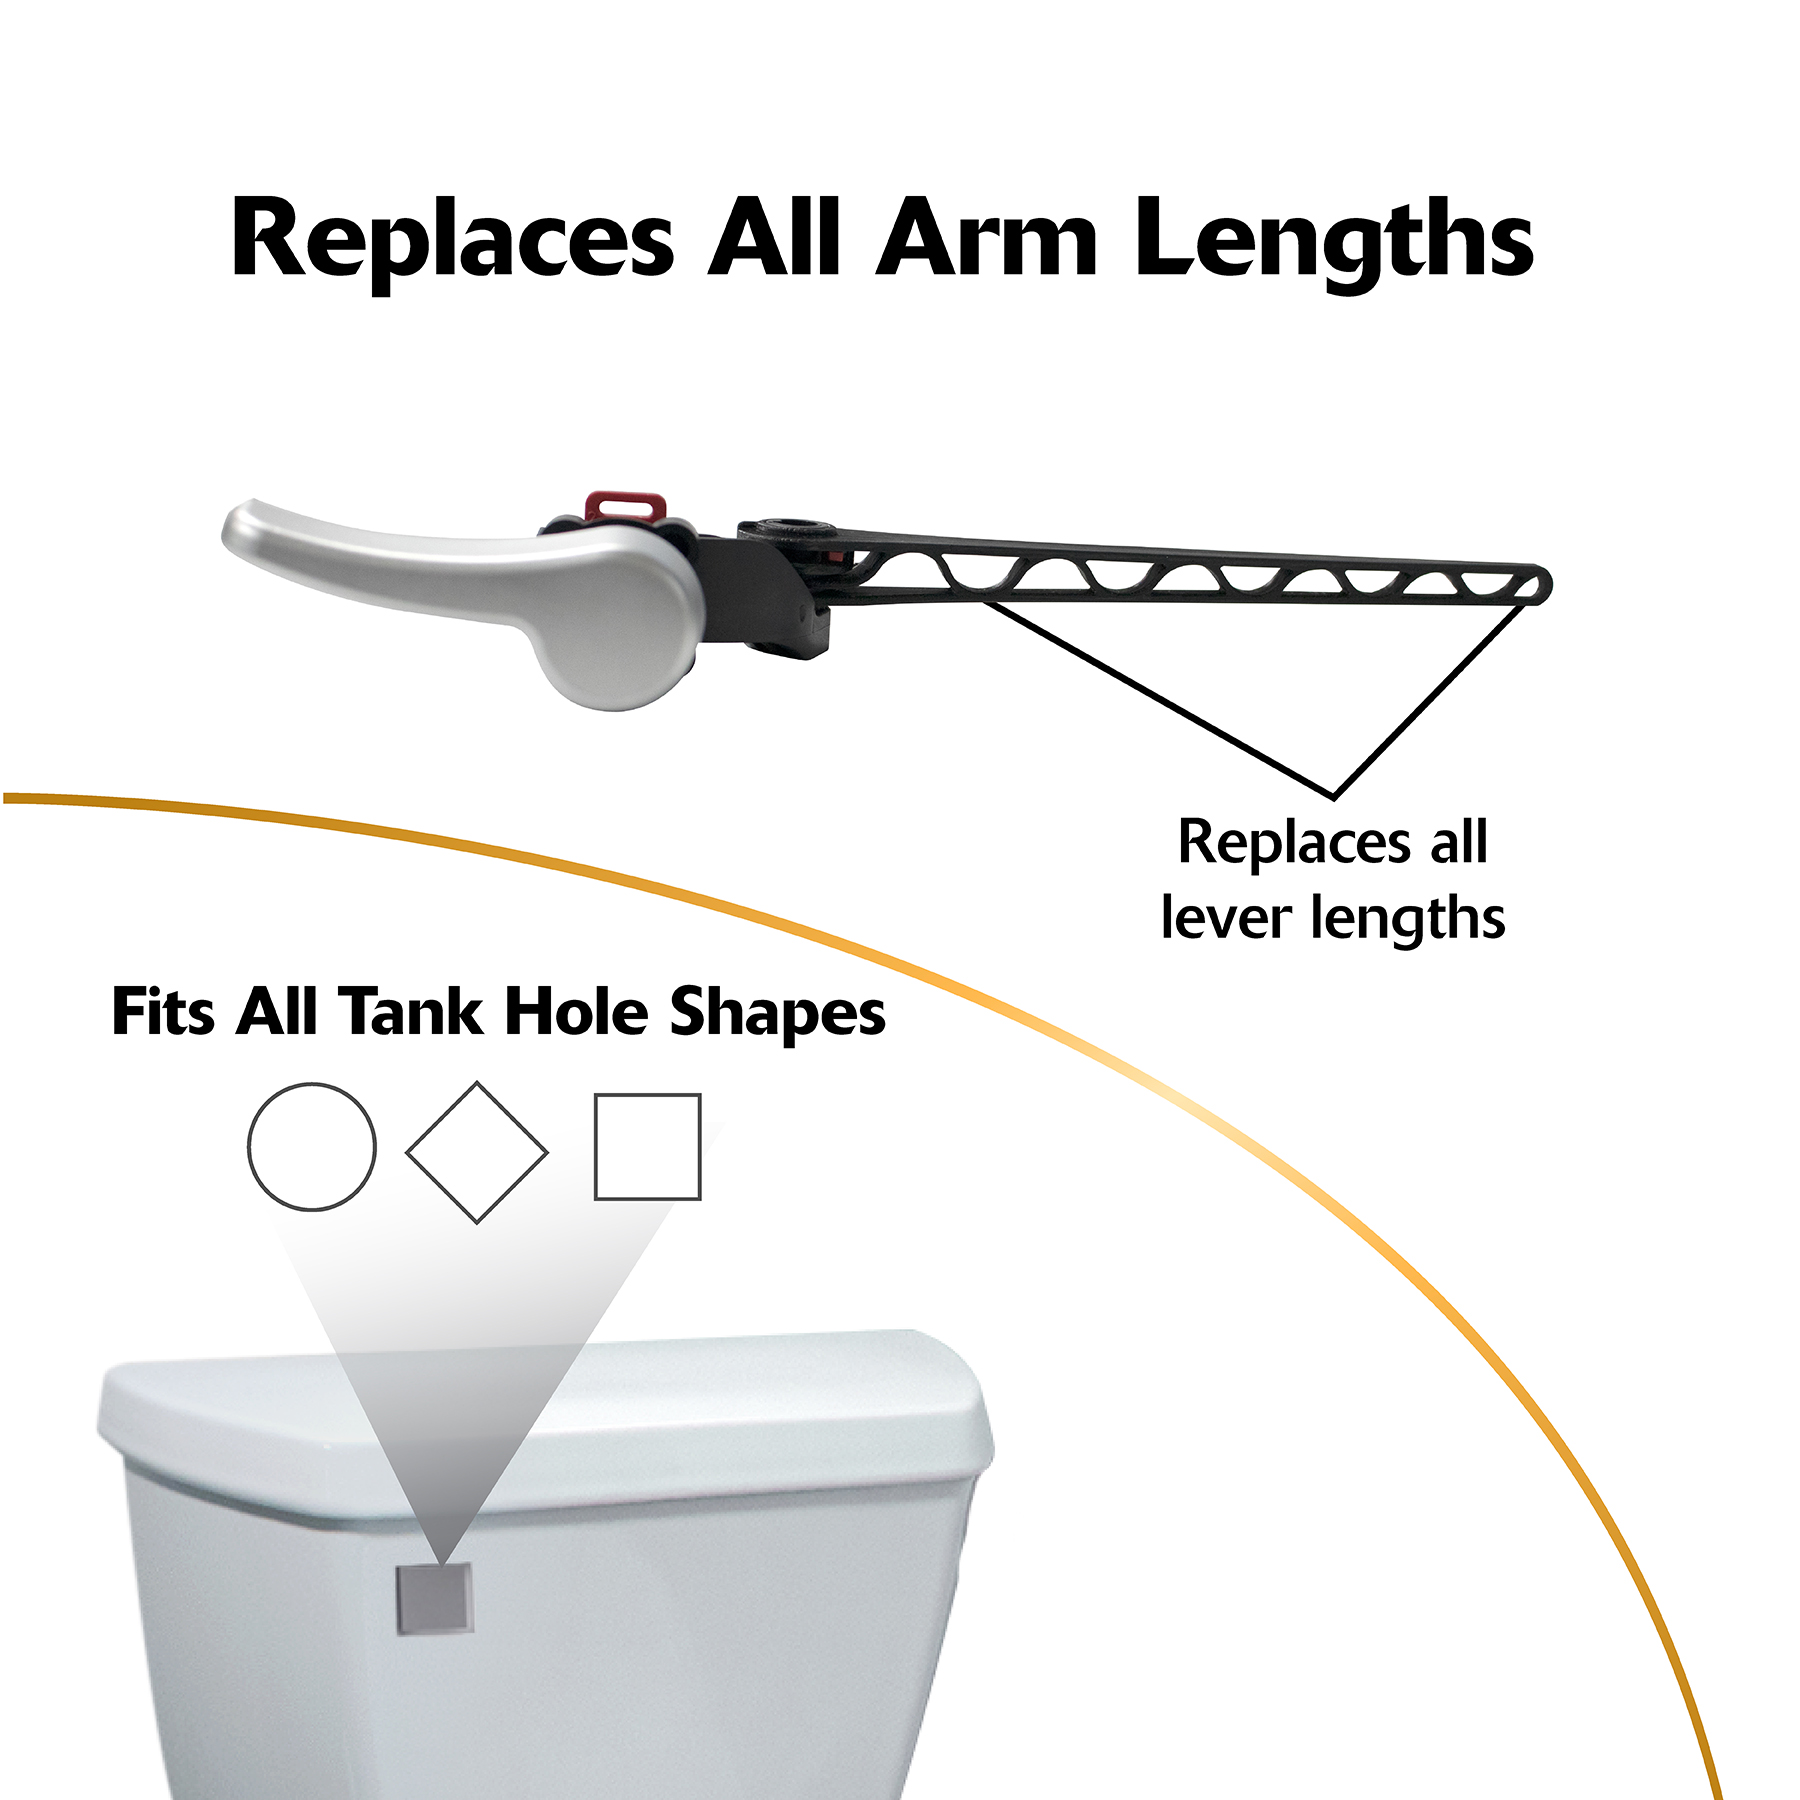 white toilet flush handle replaces all arm lengths and fits all tank hole shapes